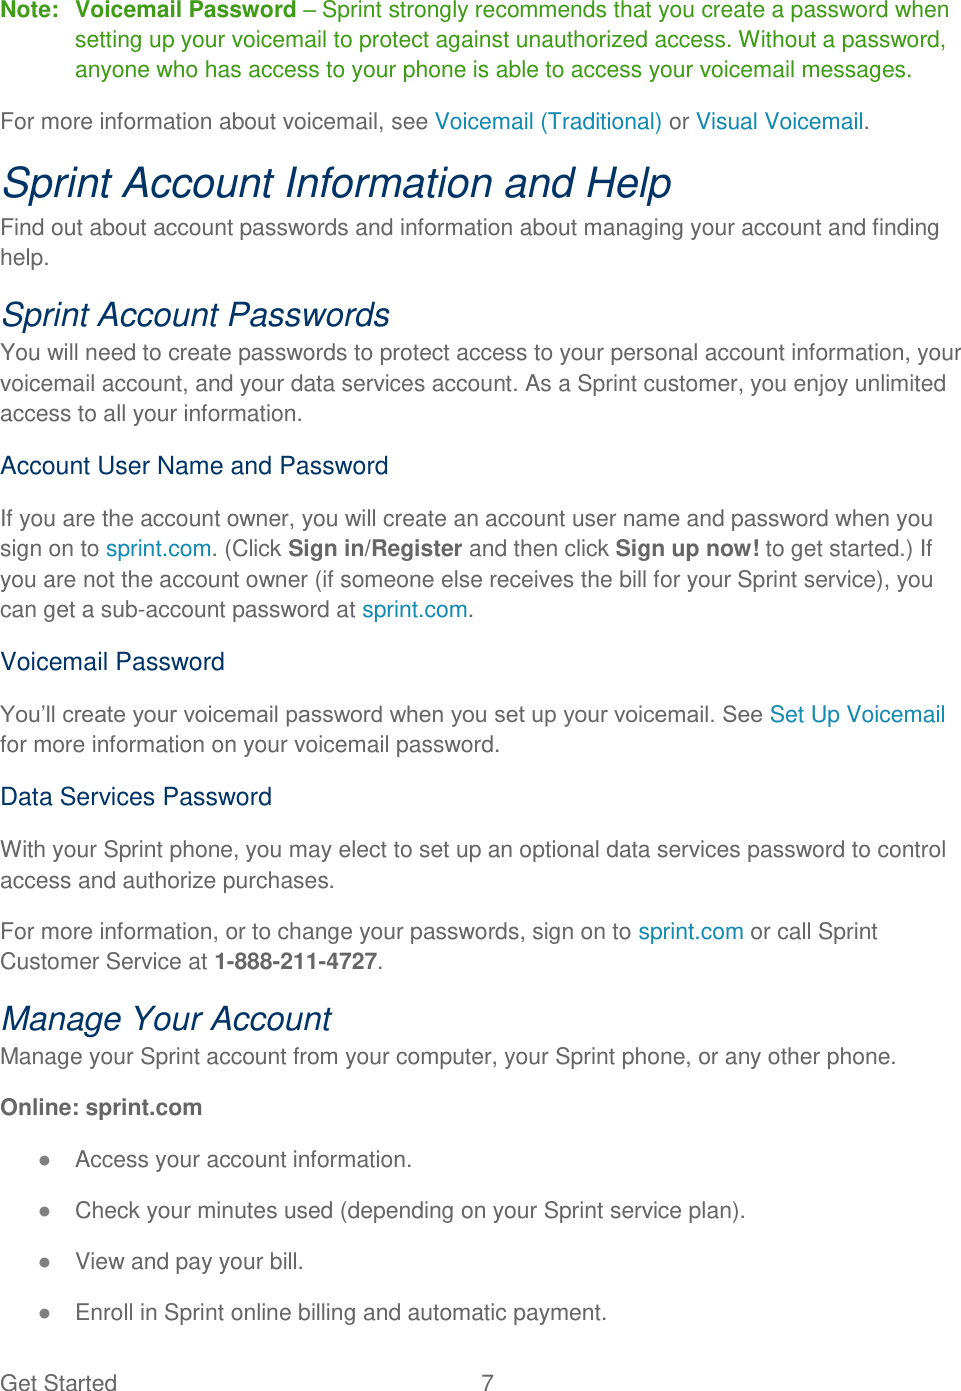 Get Started  7   Note:  Voicemail Password – Sprint strongly recommends that you create a password when setting up your voicemail to protect against unauthorized access. Without a password, anyone who has access to your phone is able to access your voicemail messages. For more information about voicemail, see Voicemail (Traditional) or Visual Voicemail. Sprint Account Information and Help Find out about account passwords and information about managing your account and finding help. Sprint Account Passwords You will need to create passwords to protect access to your personal account information, your voicemail account, and your data services account. As a Sprint customer, you enjoy unlimited access to all your information. Account User Name and Password If you are the account owner, you will create an account user name and password when you sign on to sprint.com. (Click Sign in/Register and then click Sign up now! to get started.) If you are not the account owner (if someone else receives the bill for your Sprint service), you can get a sub-account password at sprint.com. Voicemail Password You‟ll create your voicemail password when you set up your voicemail. See Set Up Voicemail for more information on your voicemail password. Data Services Password With your Sprint phone, you may elect to set up an optional data services password to control access and authorize purchases. For more information, or to change your passwords, sign on to sprint.com or call Sprint Customer Service at 1-888-211-4727. Manage Your Account Manage your Sprint account from your computer, your Sprint phone, or any other phone. Online: sprint.com ● Access your account information. ● Check your minutes used (depending on your Sprint service plan). ● View and pay your bill. ● Enroll in Sprint online billing and automatic payment. 